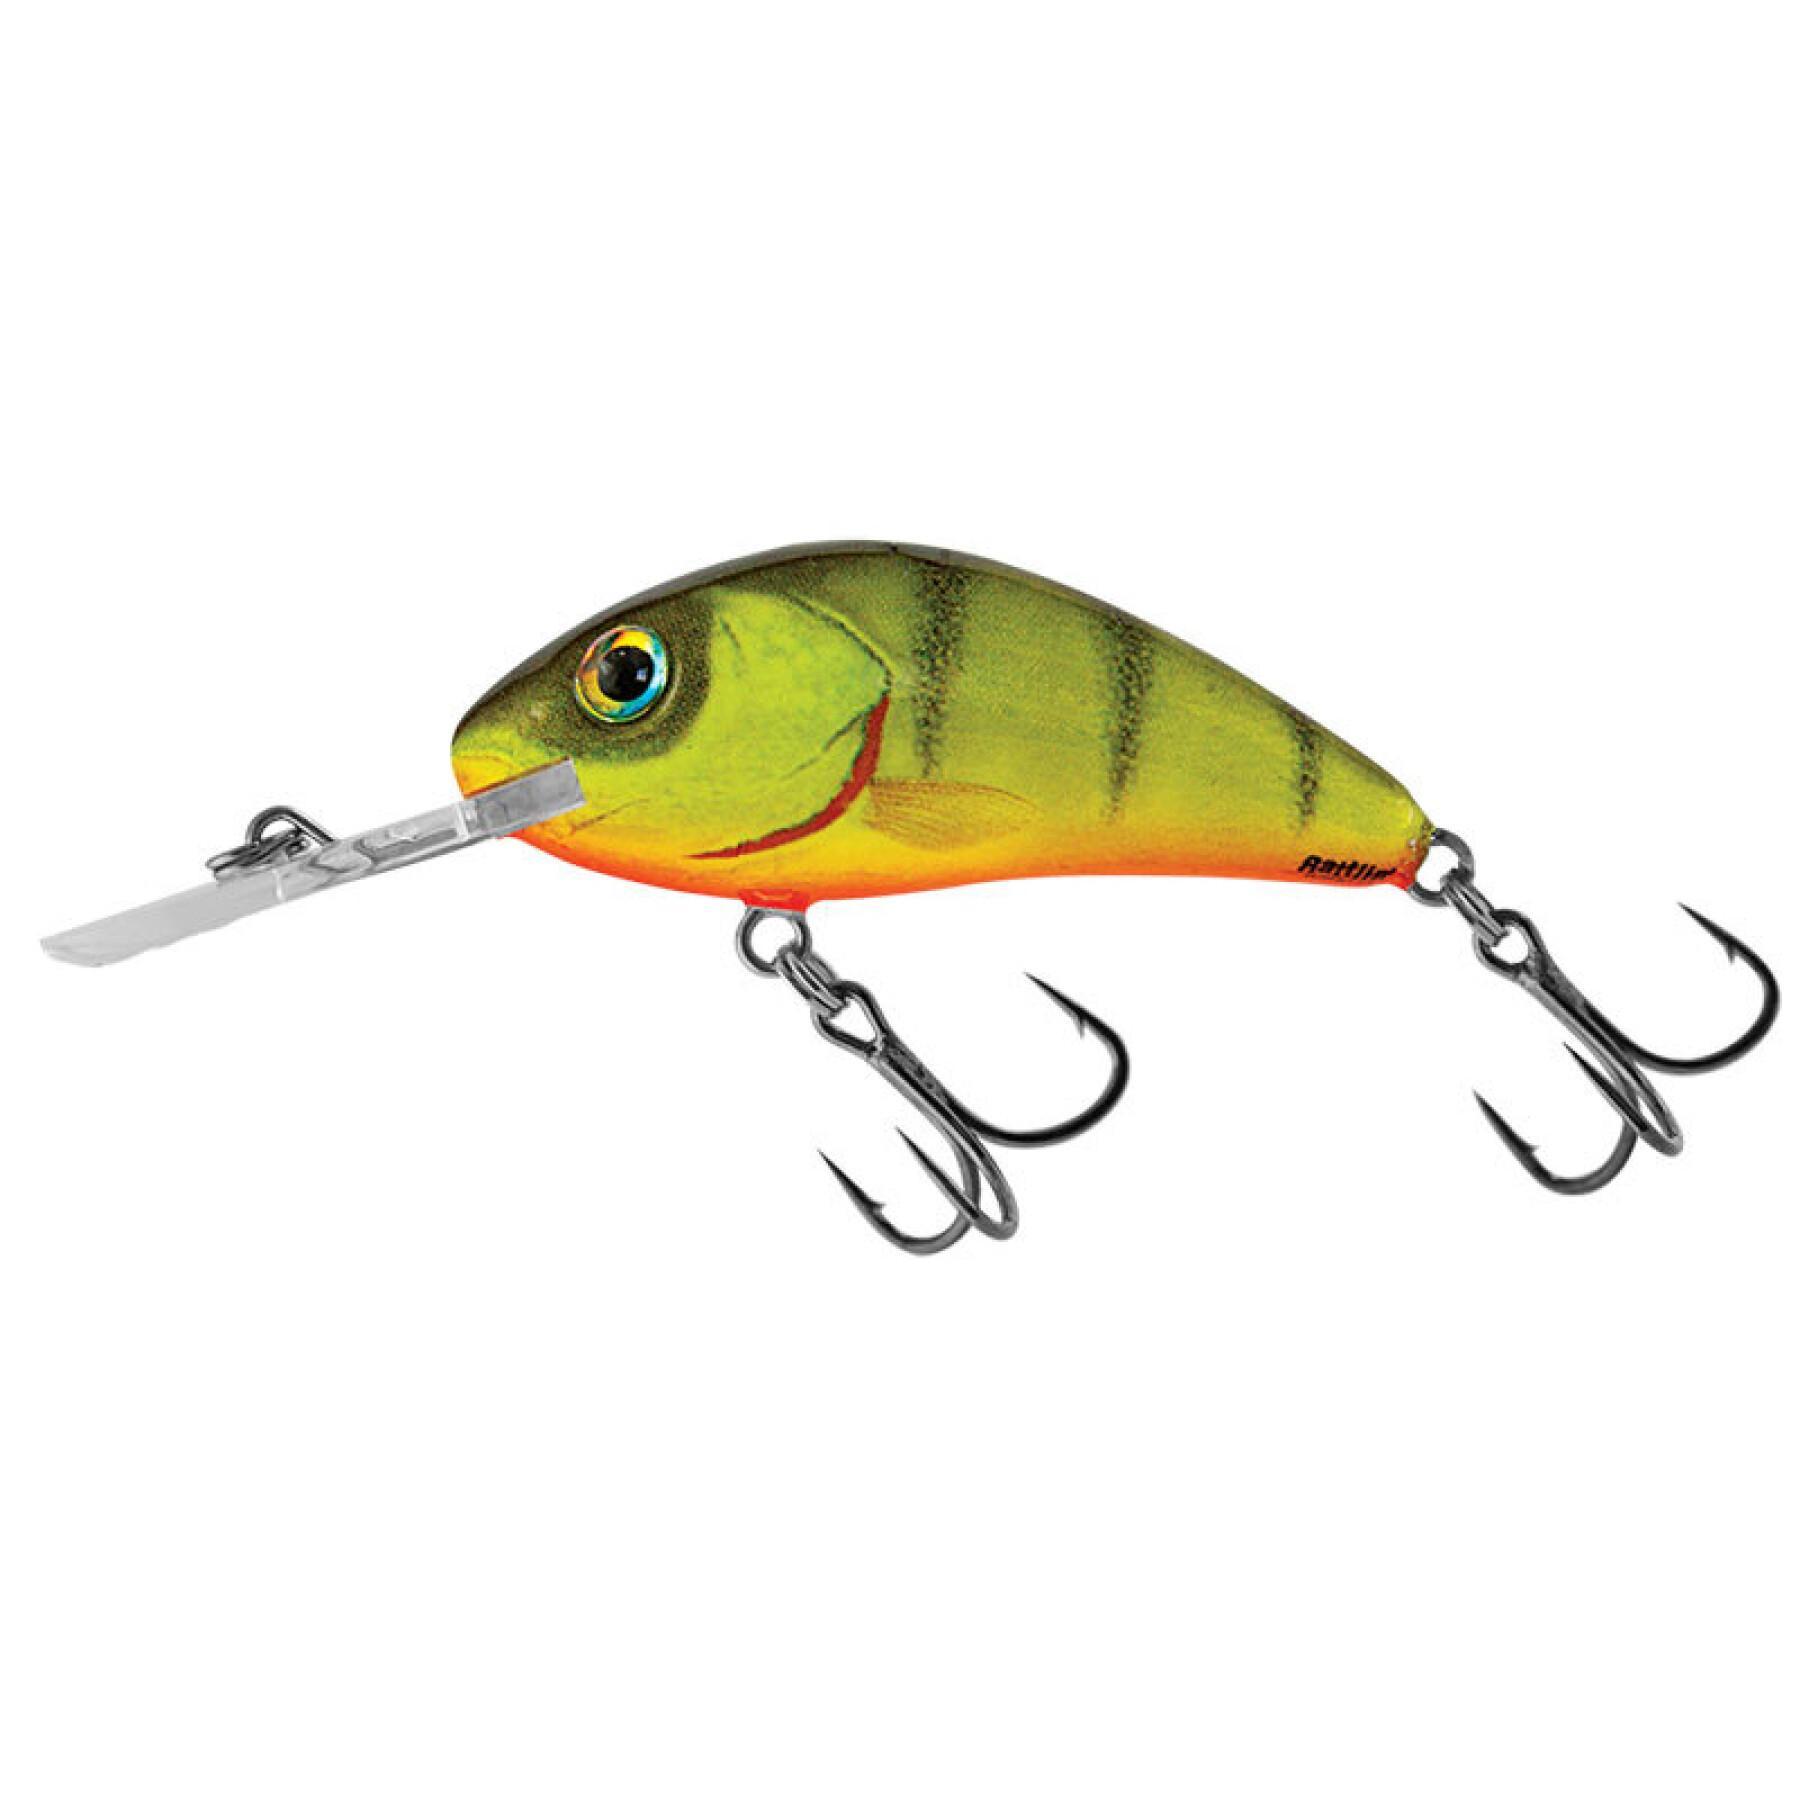 Lure Salmo H55 Holographic Trout